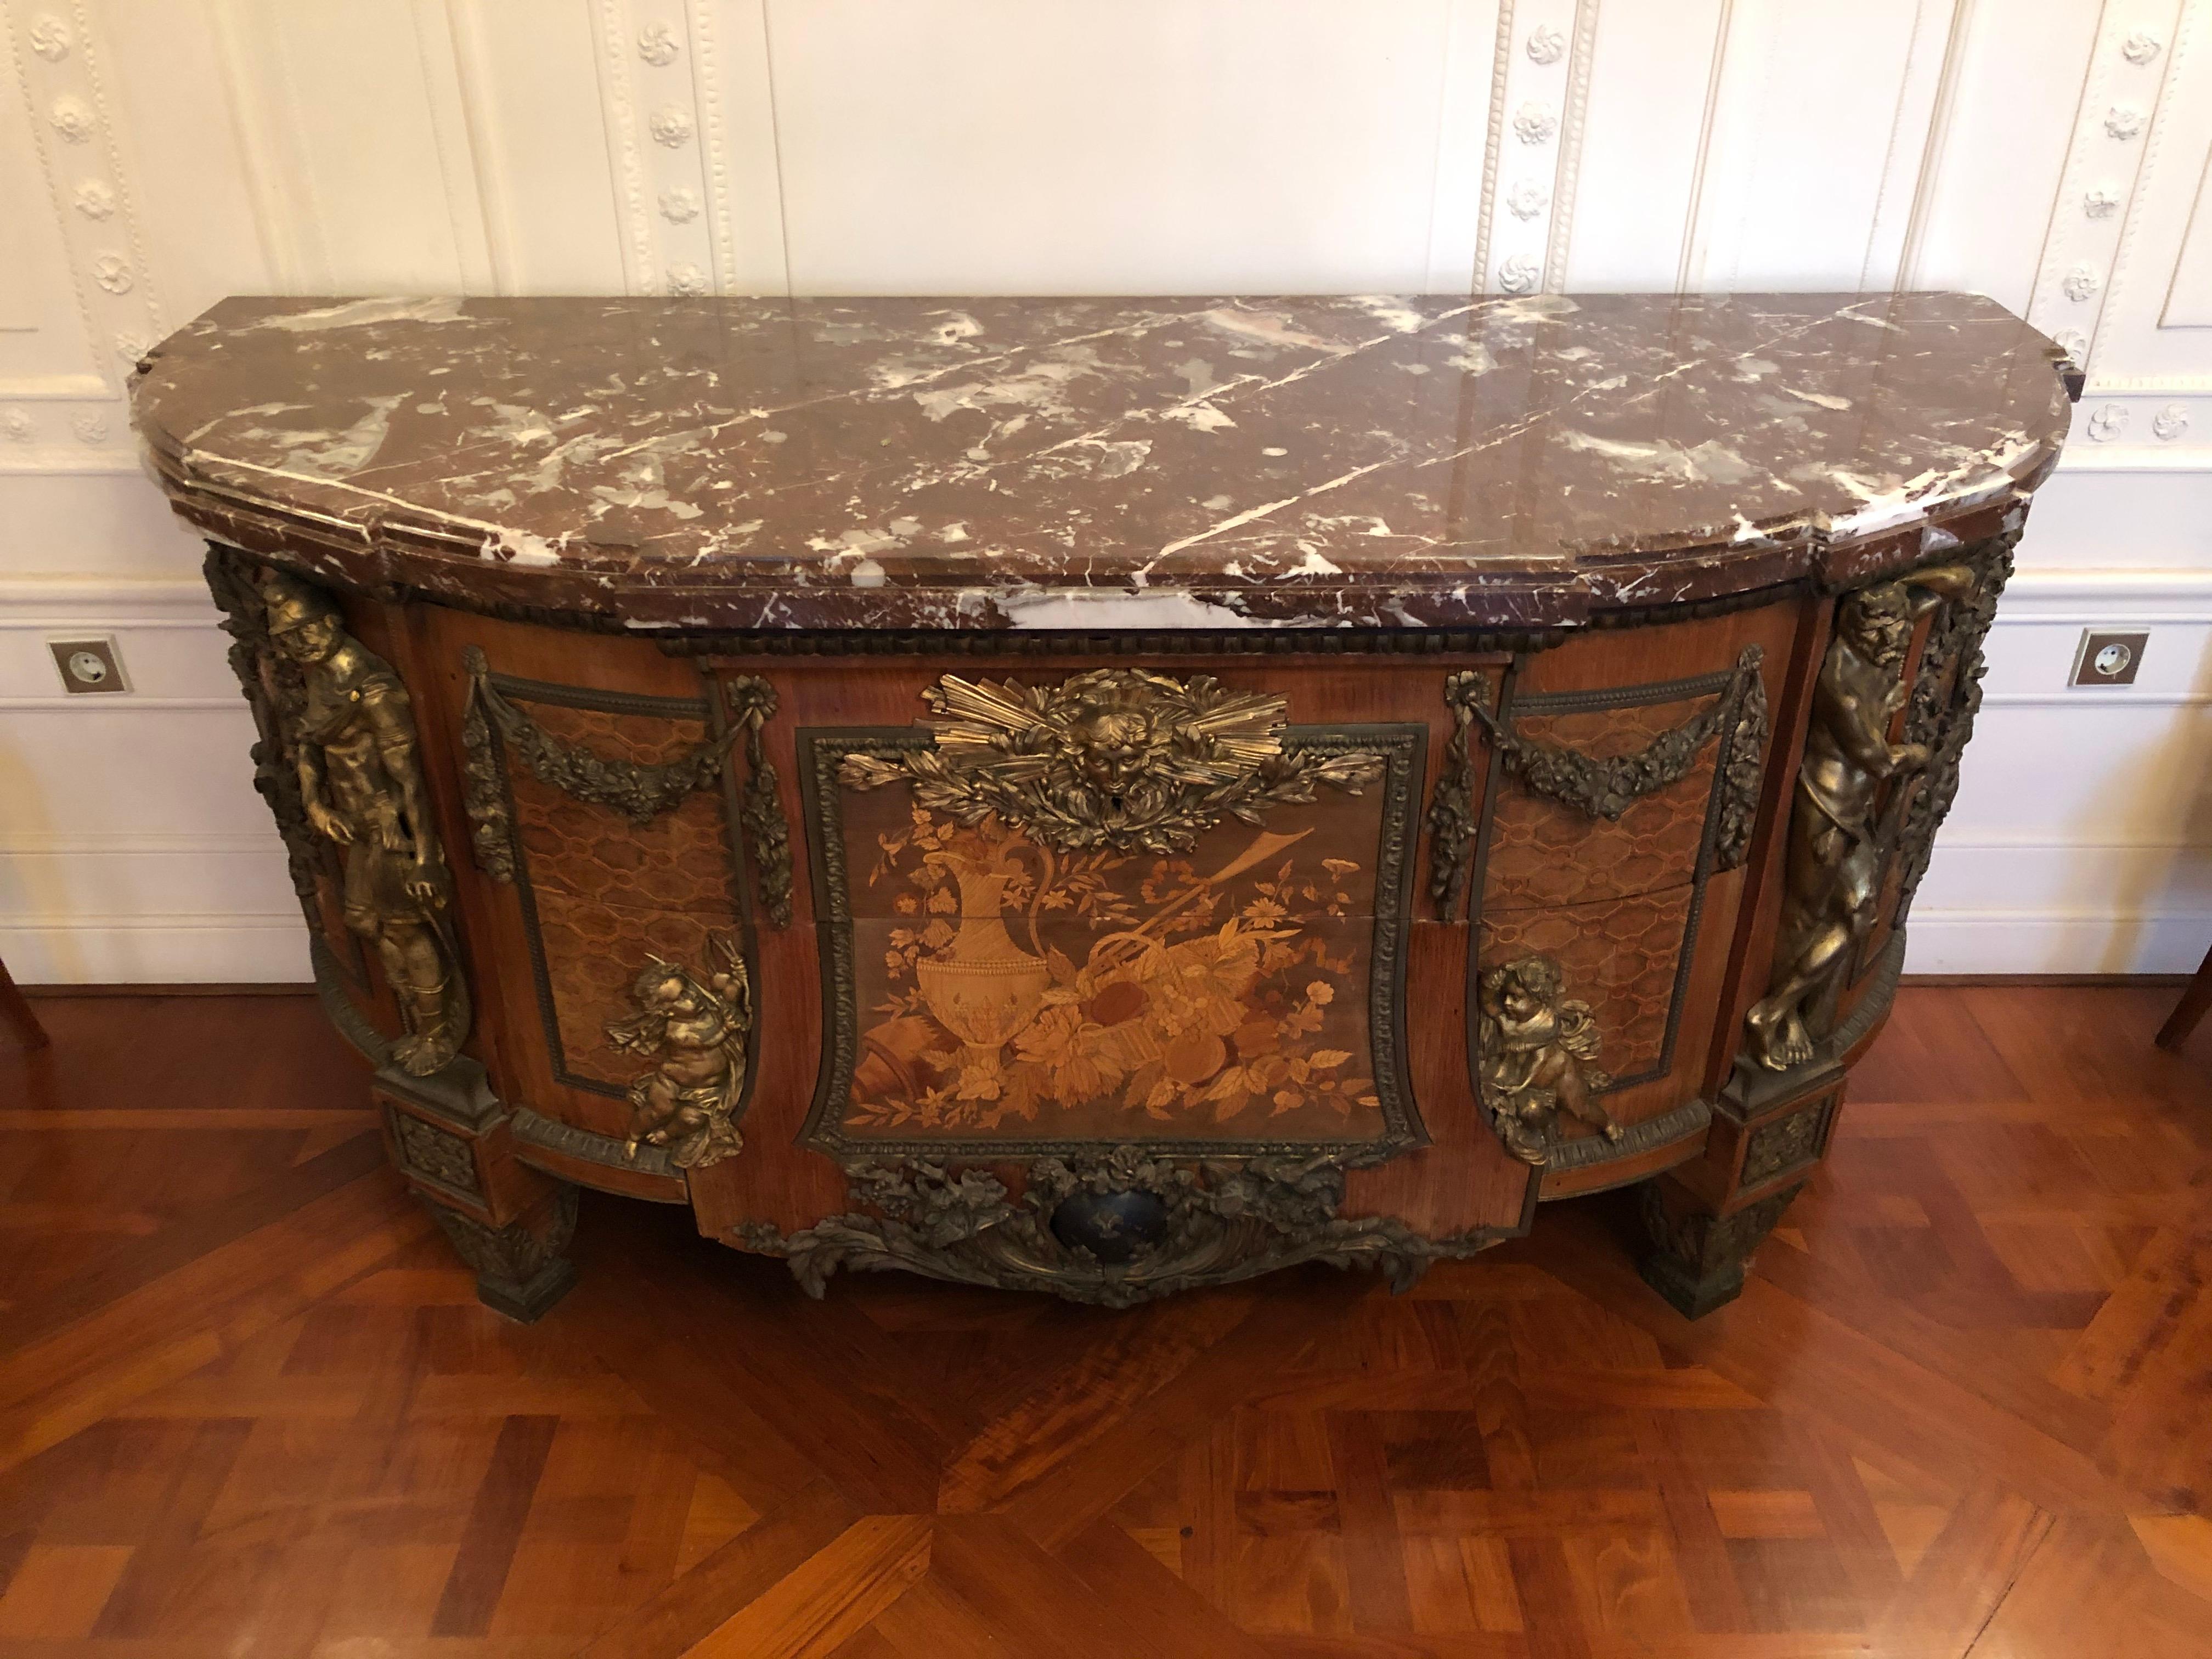 Made in hardwood, of a splayed half-ellipsoid form, with marquetry latticework in mahogany and further fine woods, with two “sans traverse” drawers with floral marquetry on a trapezoid panel, large lavish bronze mounts on the angles and sides